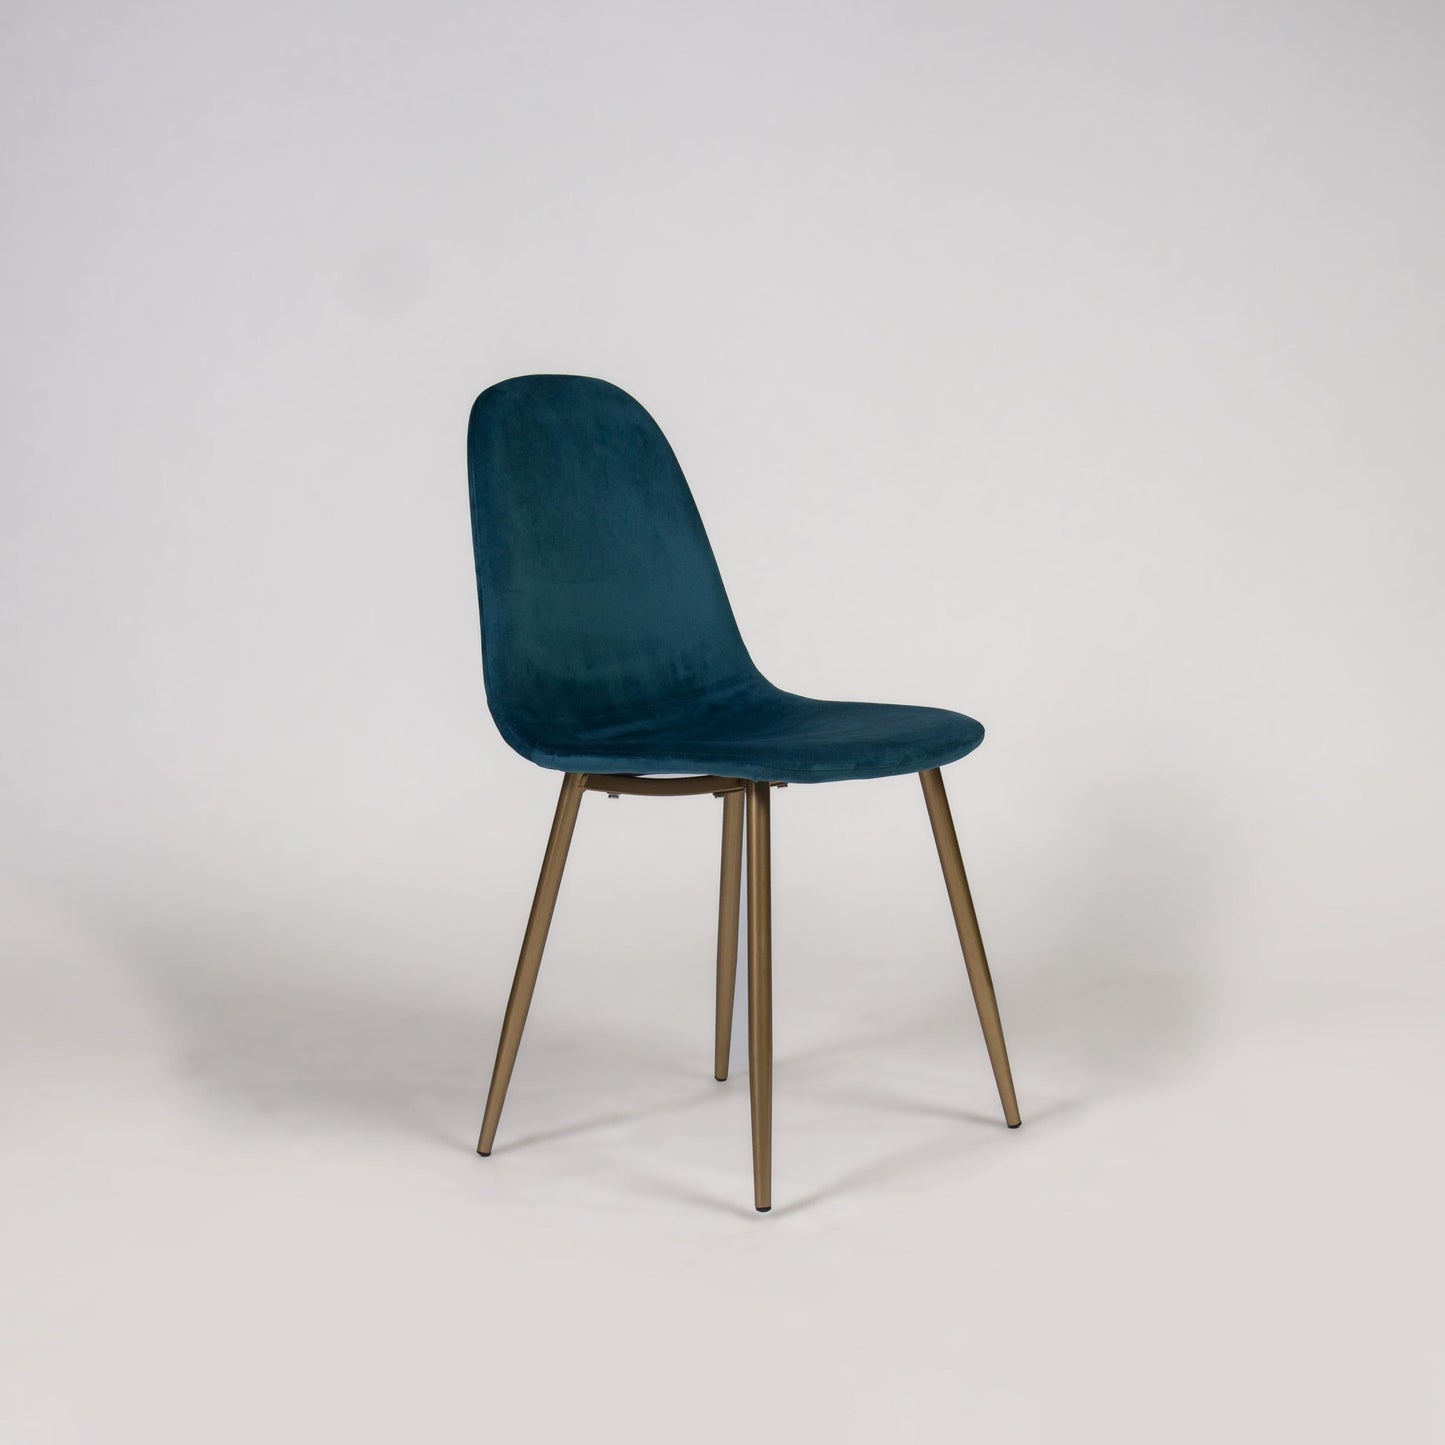 Ellis dining chairs - set of 2 - teal and gold